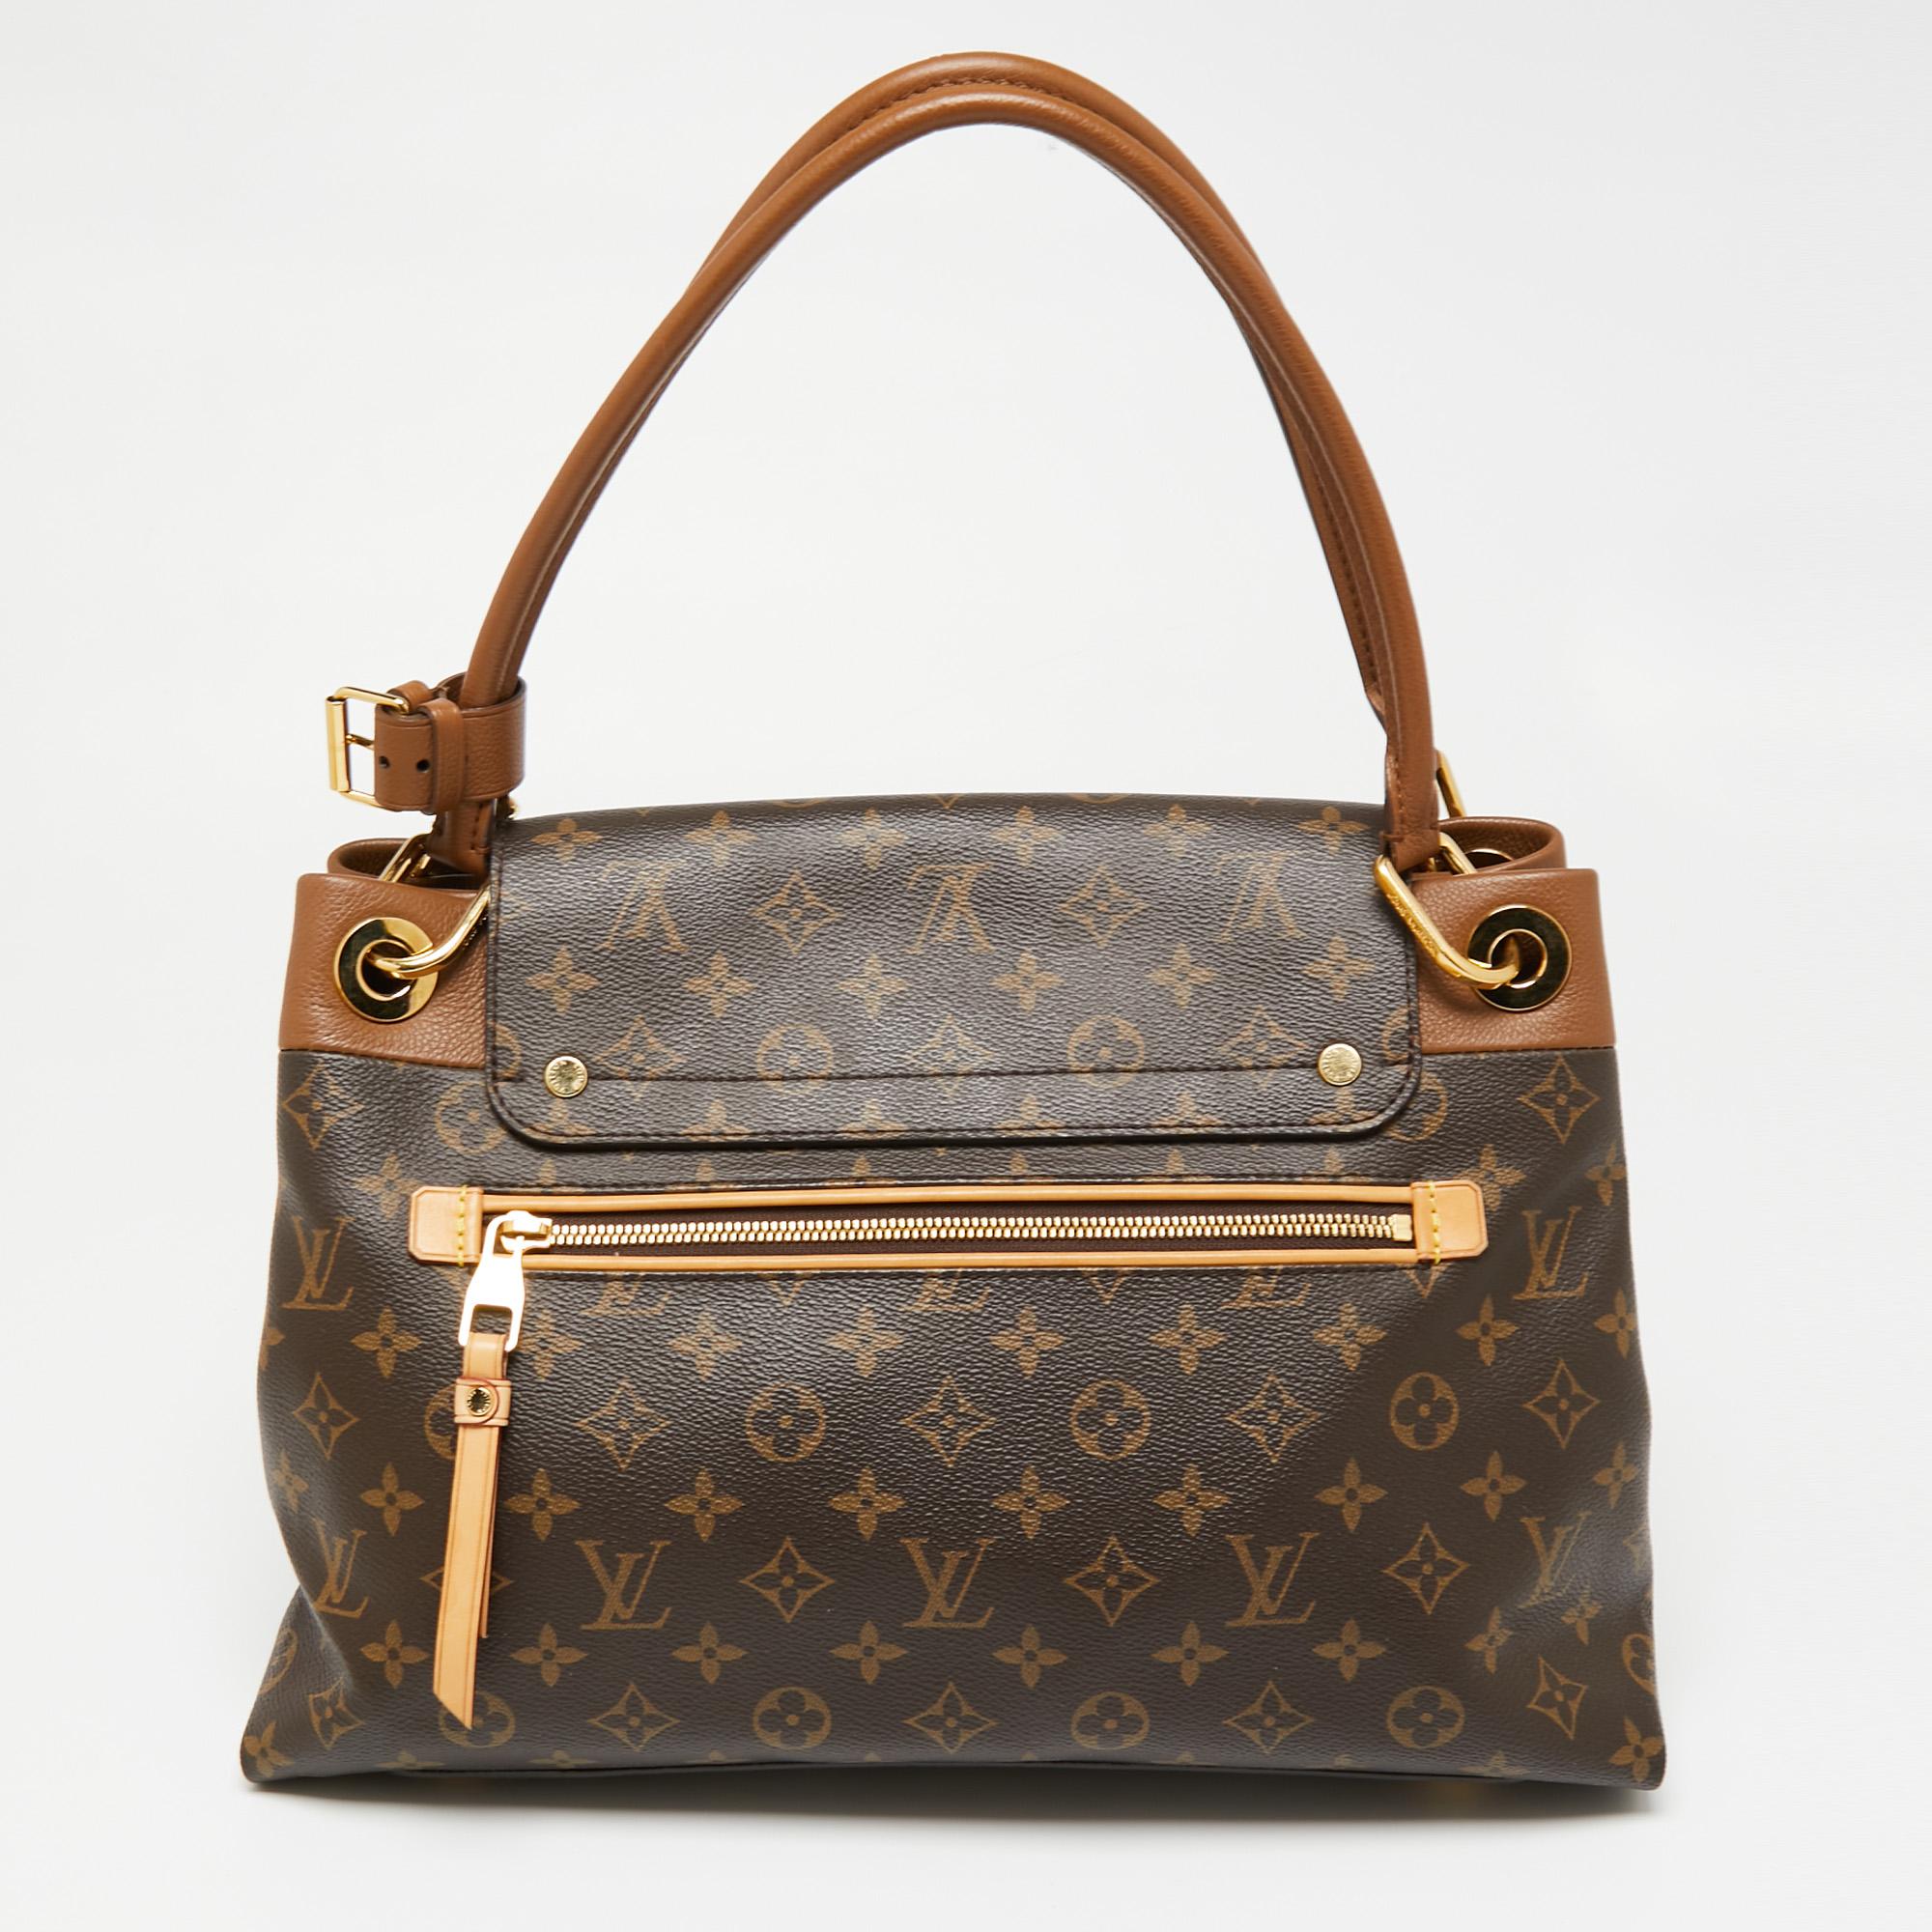 This Louis Vuitton creation has been beautifully crafted from their signature Monogram canvas and styled with a flap that has a signature lock. The insides are lined with Alcantara and sized to hold all your essentials. Lastly, the bag is equipped